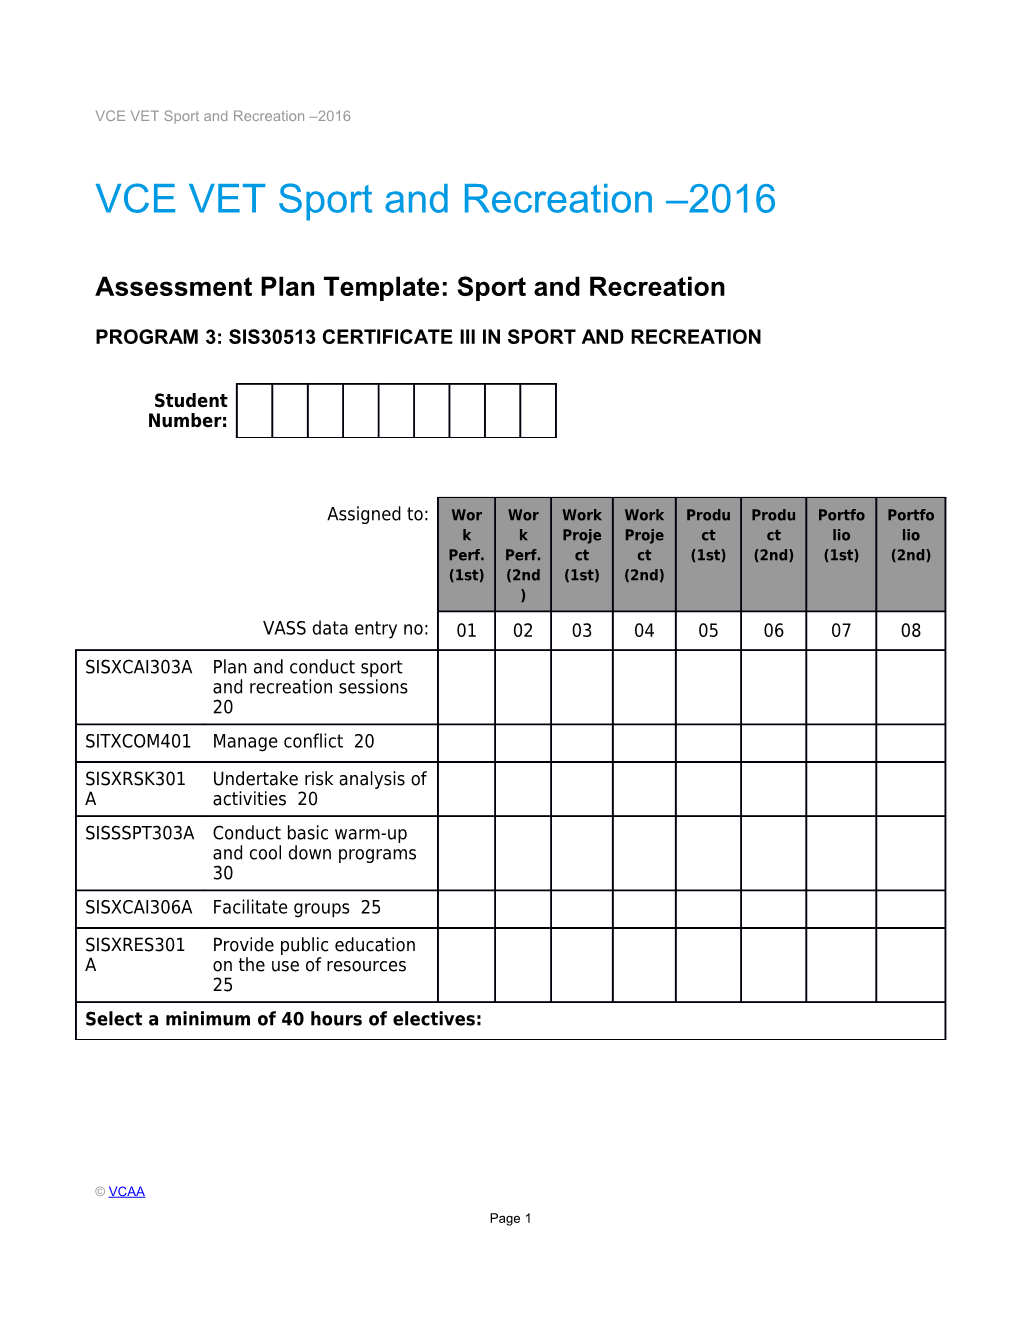 VCE VET Sport and Recreation - Assessment Plan - Template and Sample